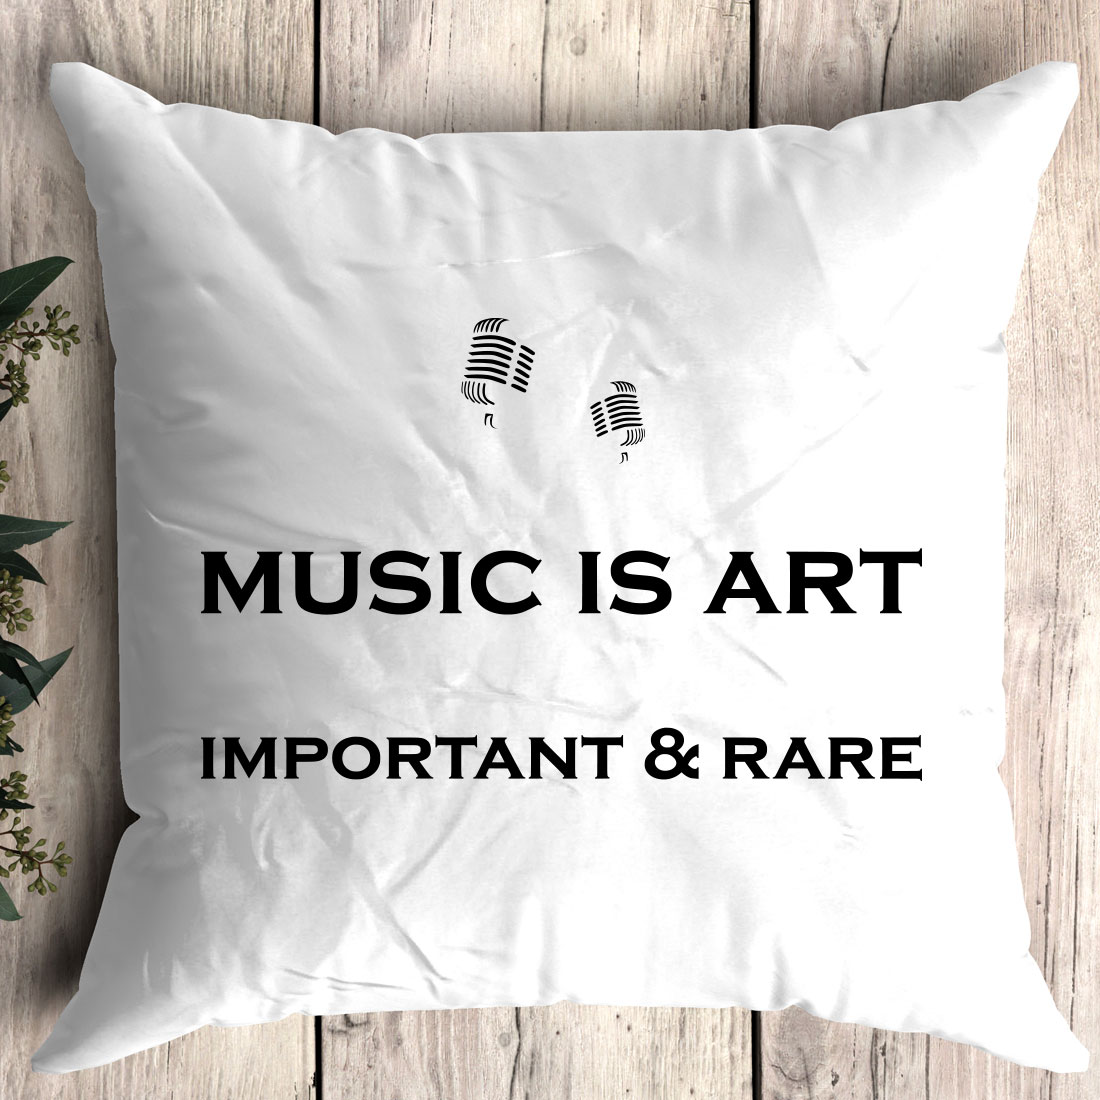 Pillow that says music is art important & rare.